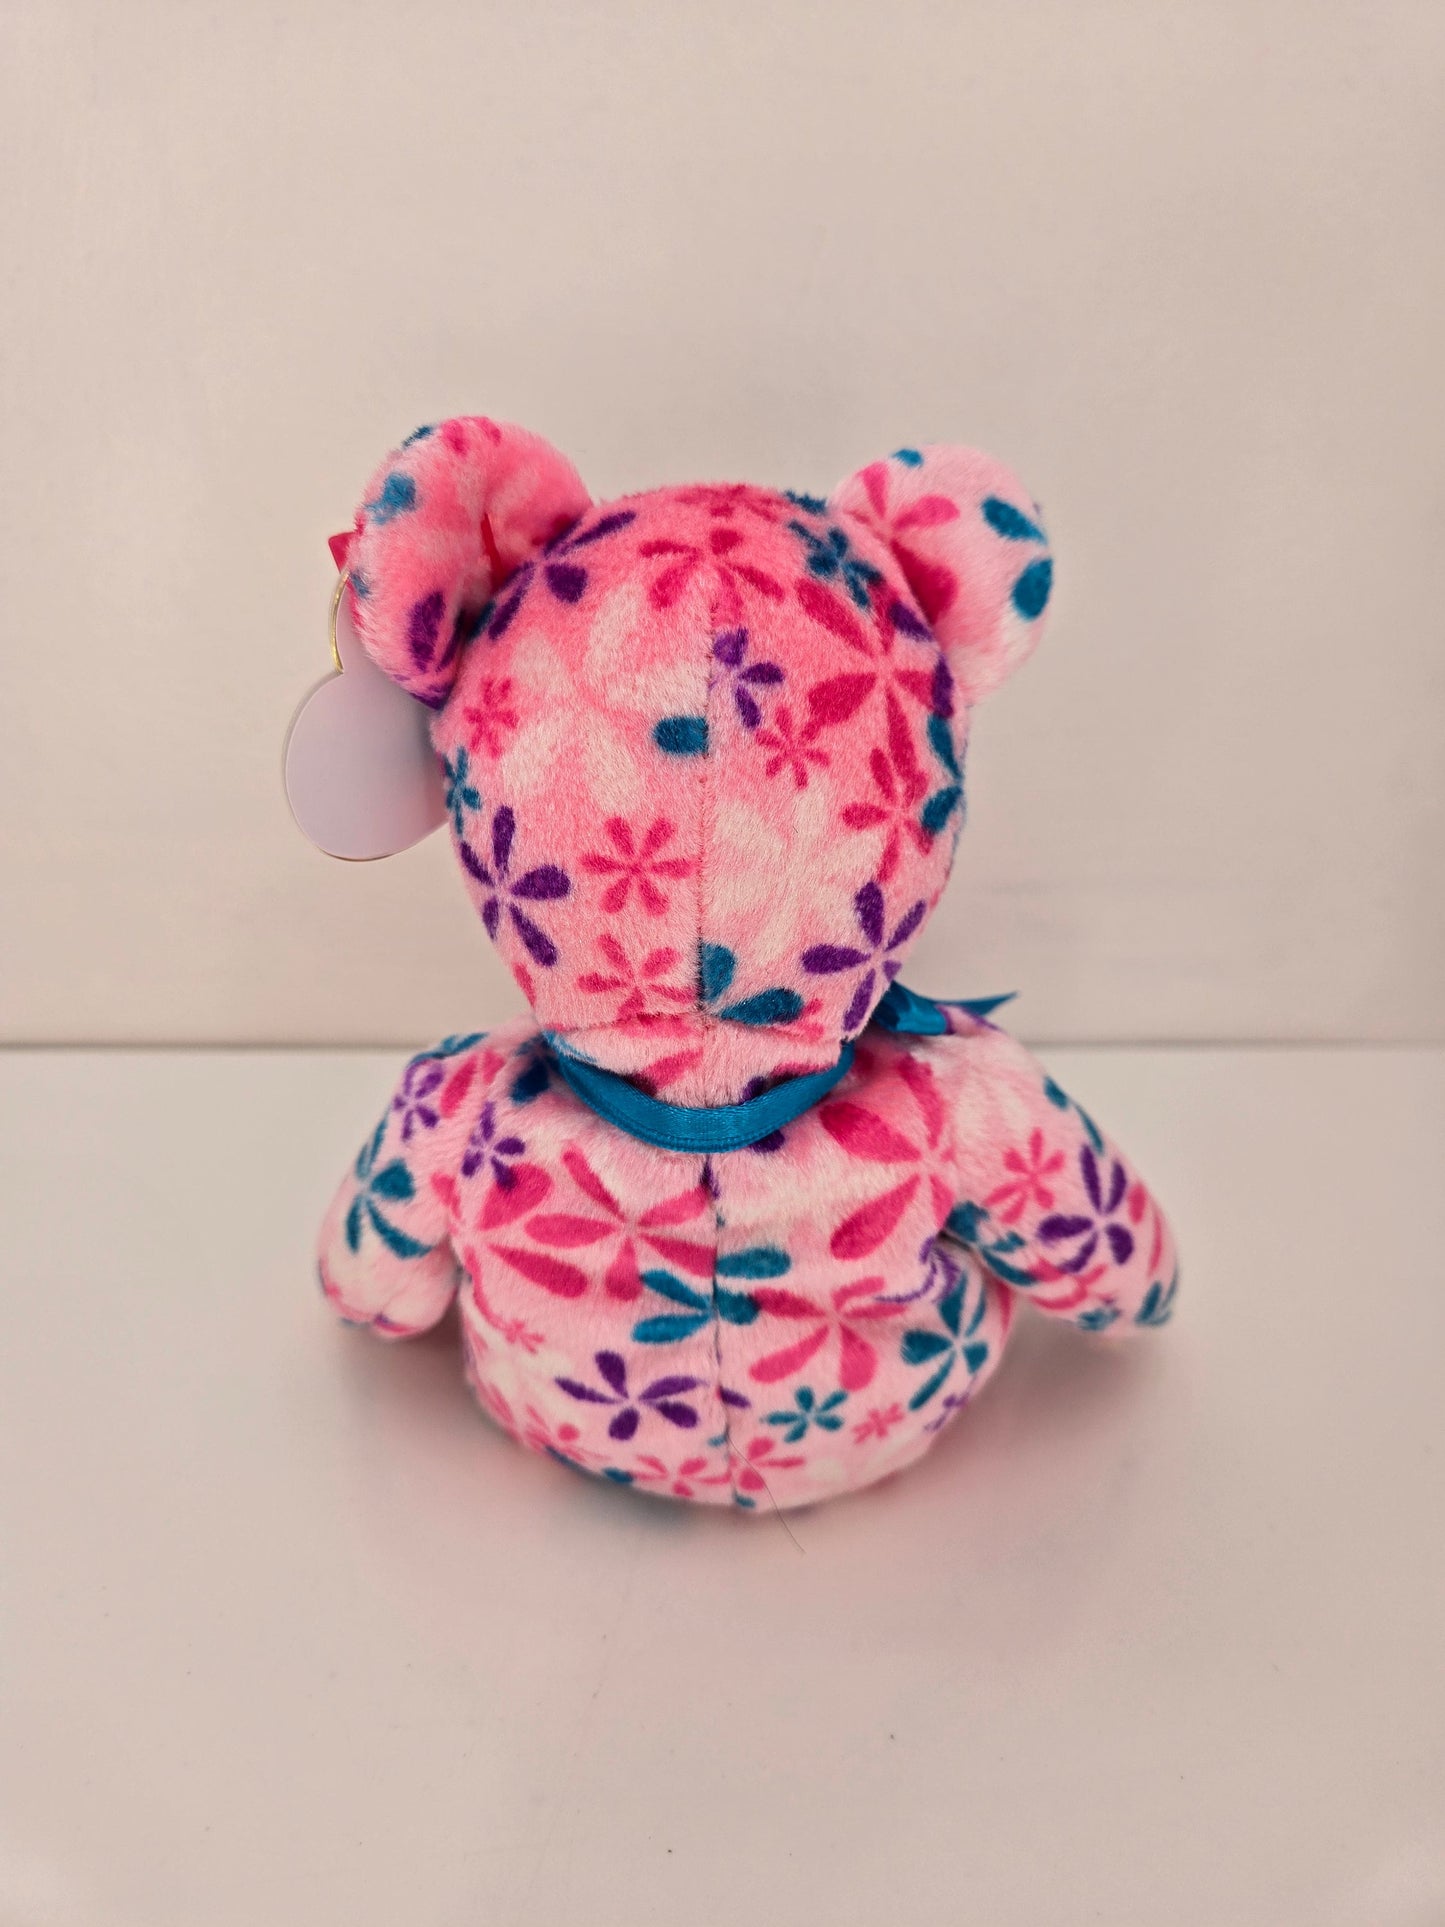 Ty Beanie Baby “Funky” the Pink Flower Bear! (8.5 inch)